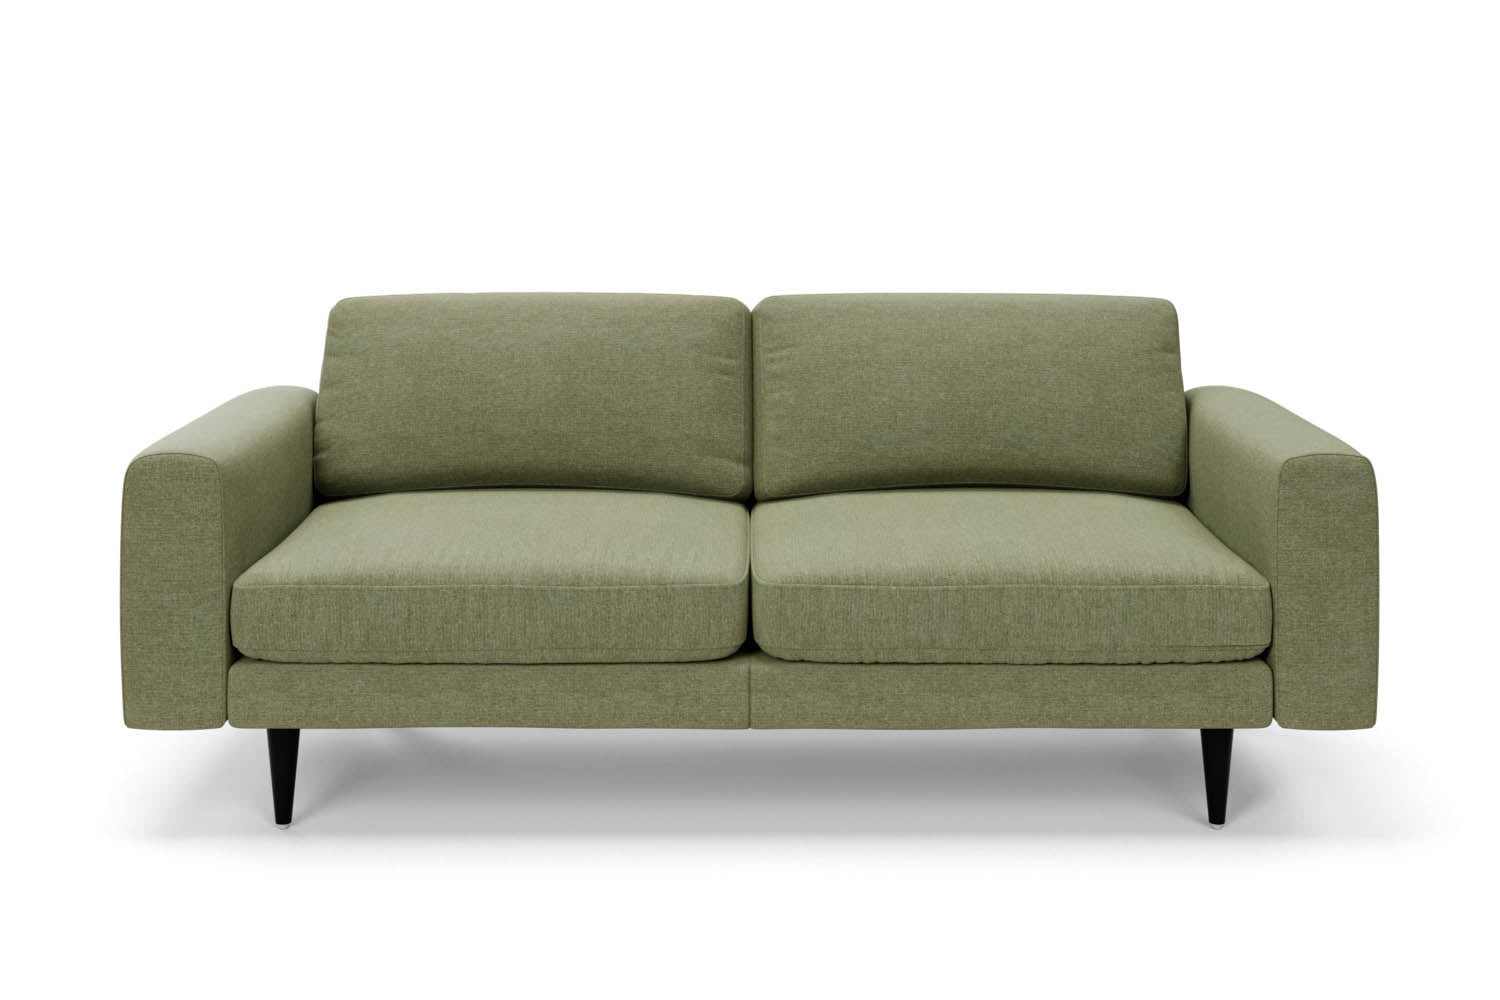 The Big Chill 3 Seater Sofa in Sage Chenille with black legs front variant_40886317973552